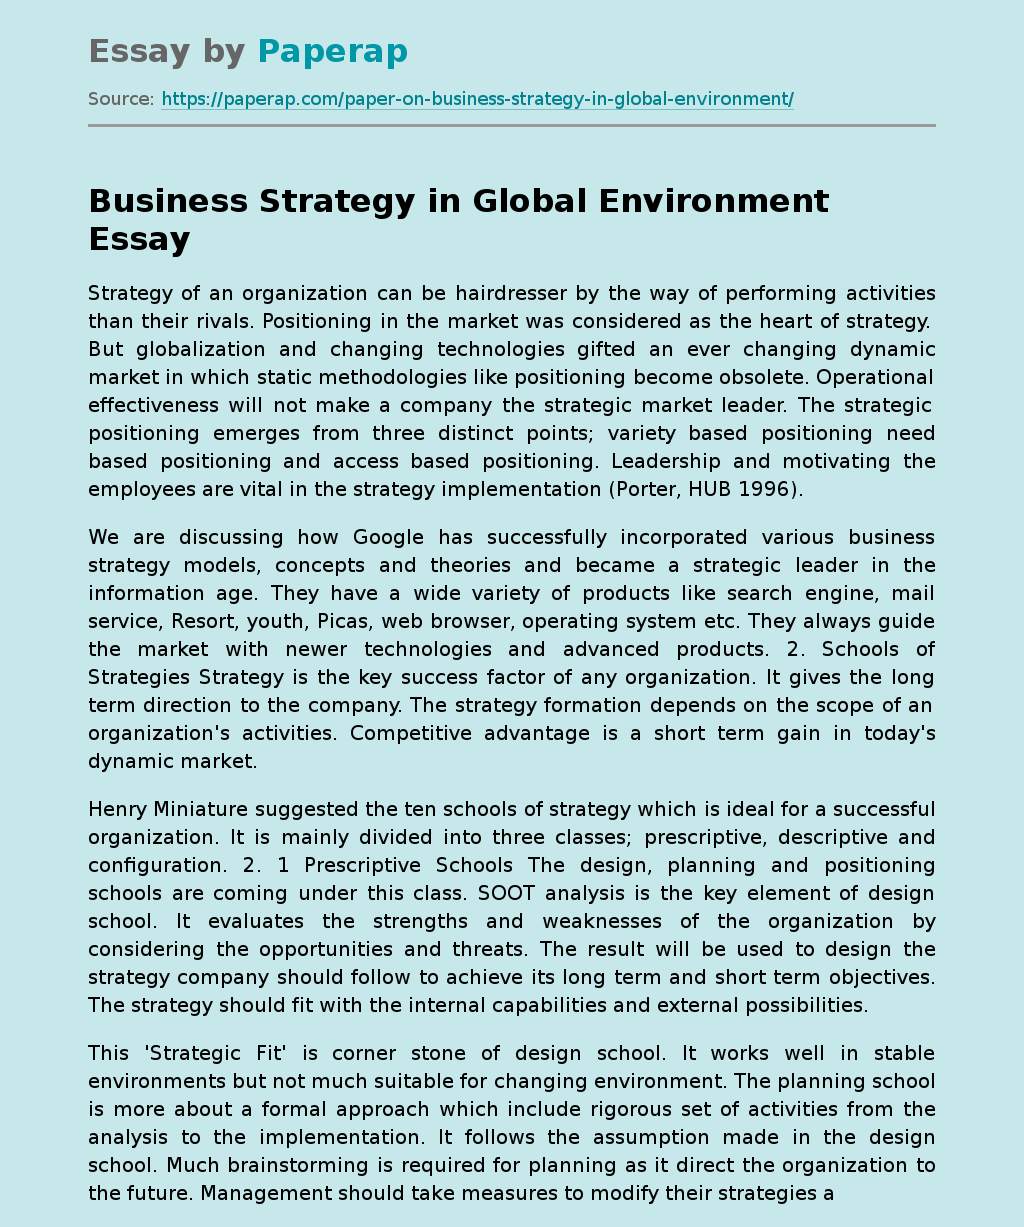 Business Strategy in Global Environment